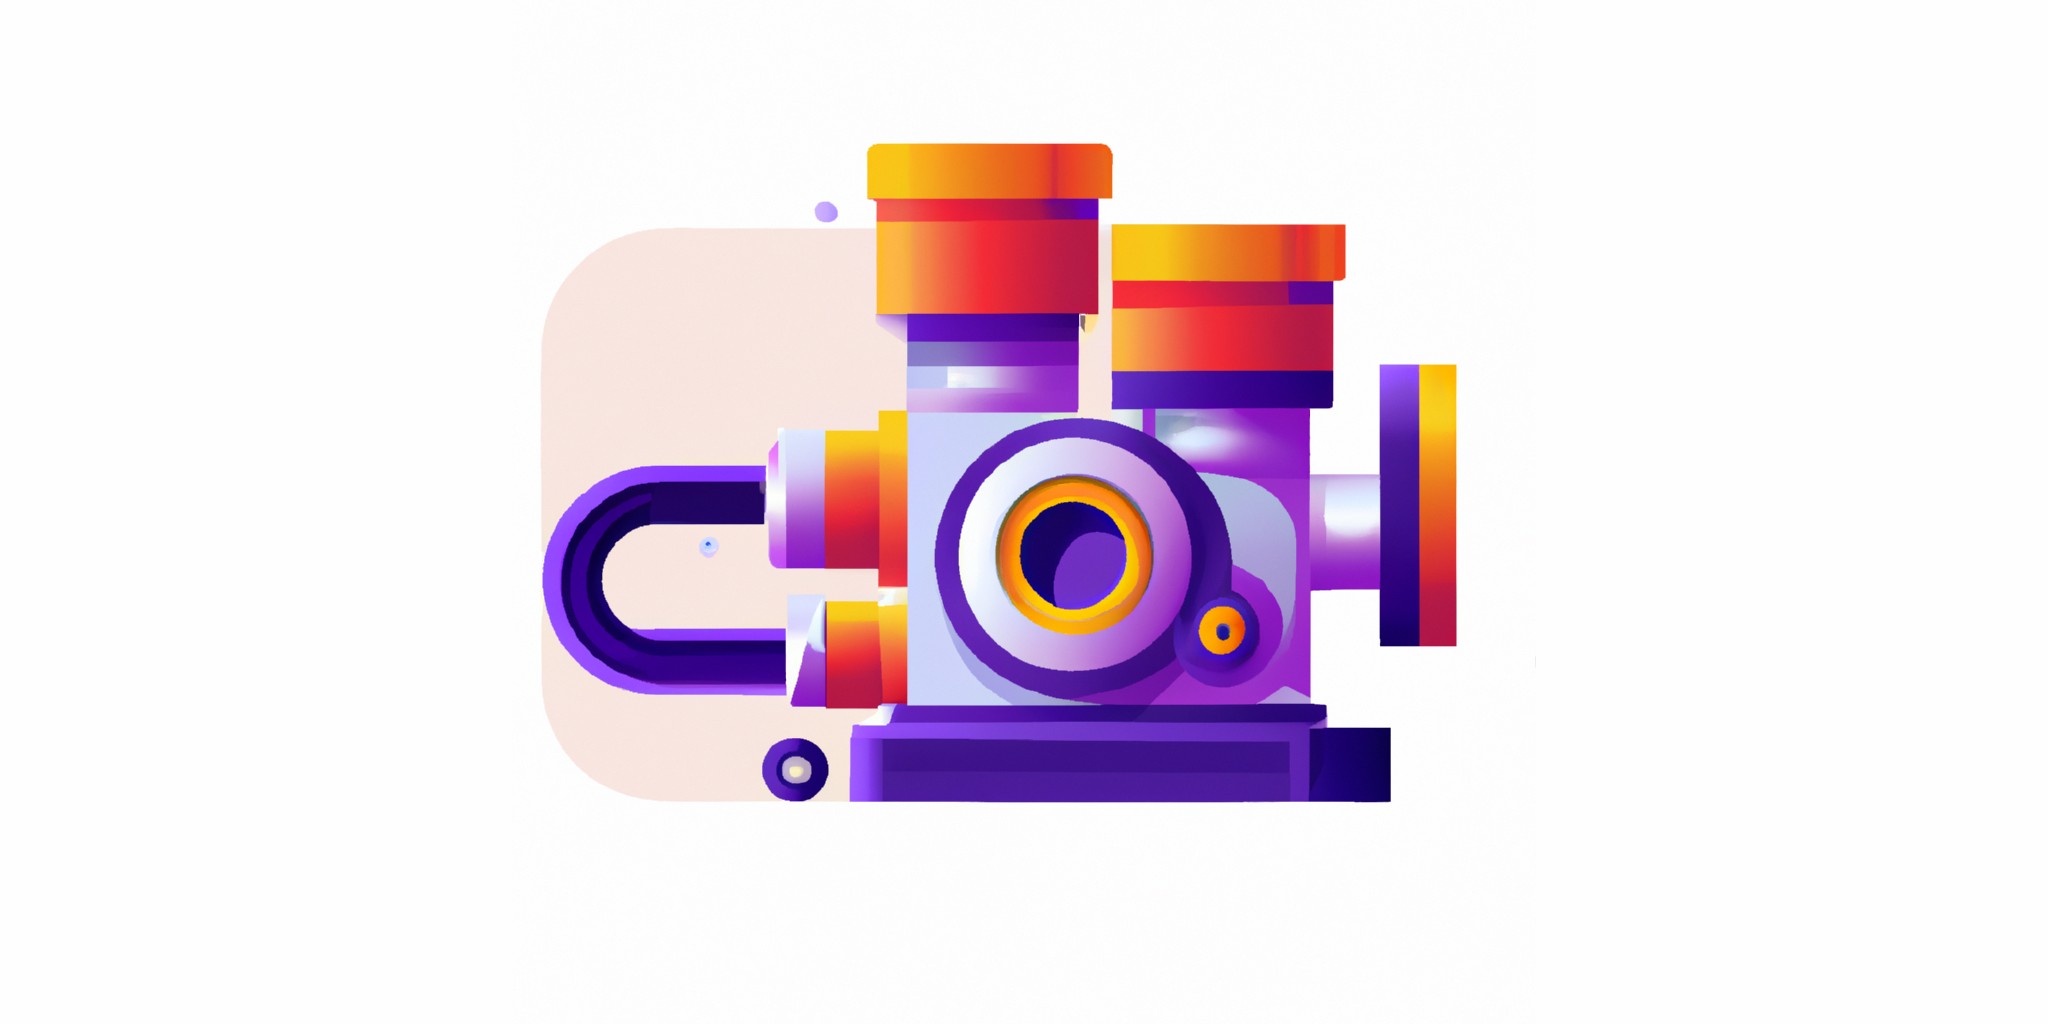 a engine in flat illustration style with gradients and white background